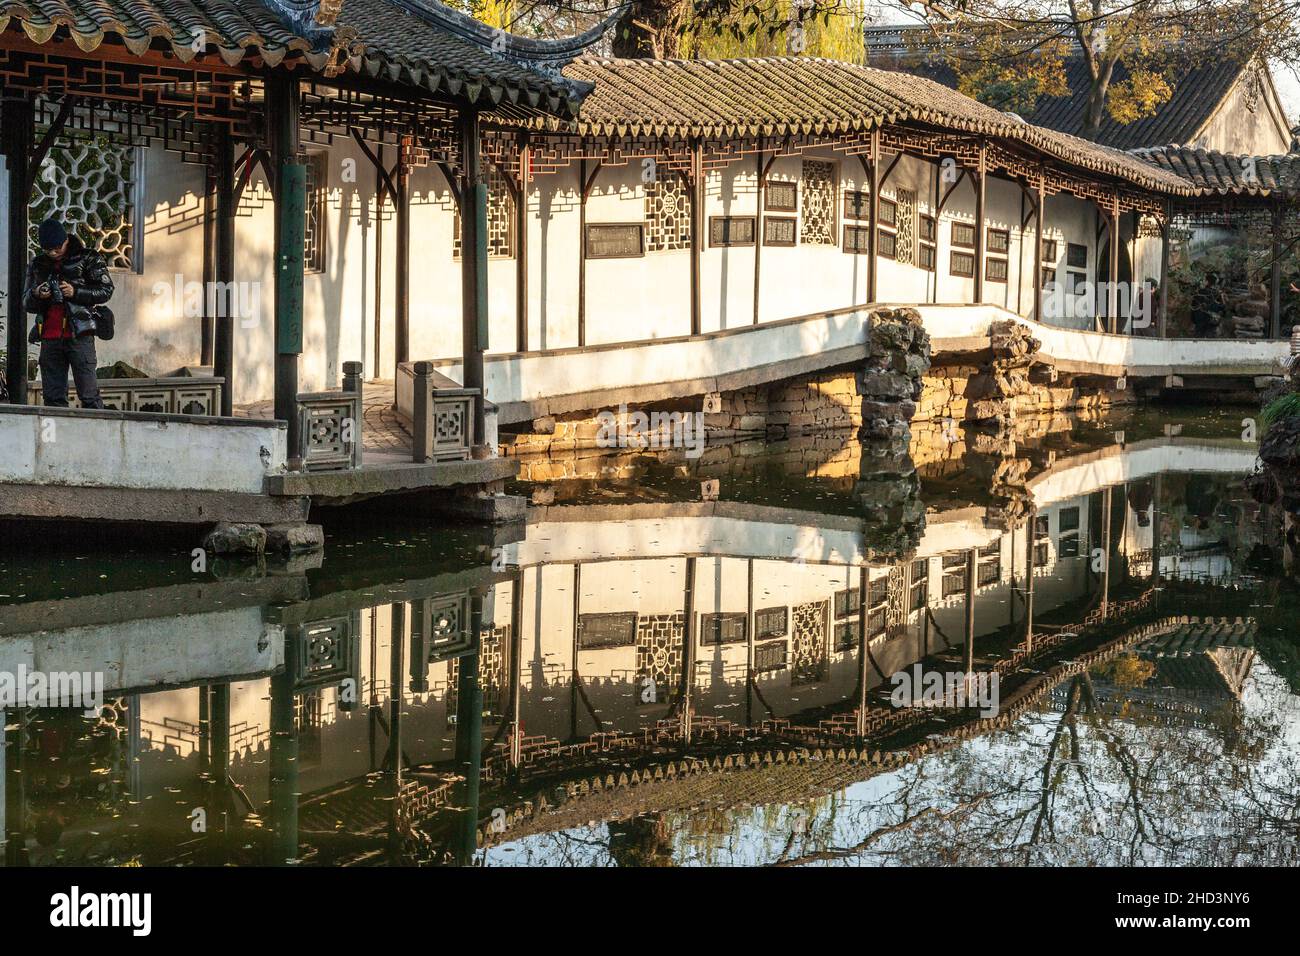 Pavilion and gallery of the Garden of the Master of the Nets in Suzhou, China Stock Photo